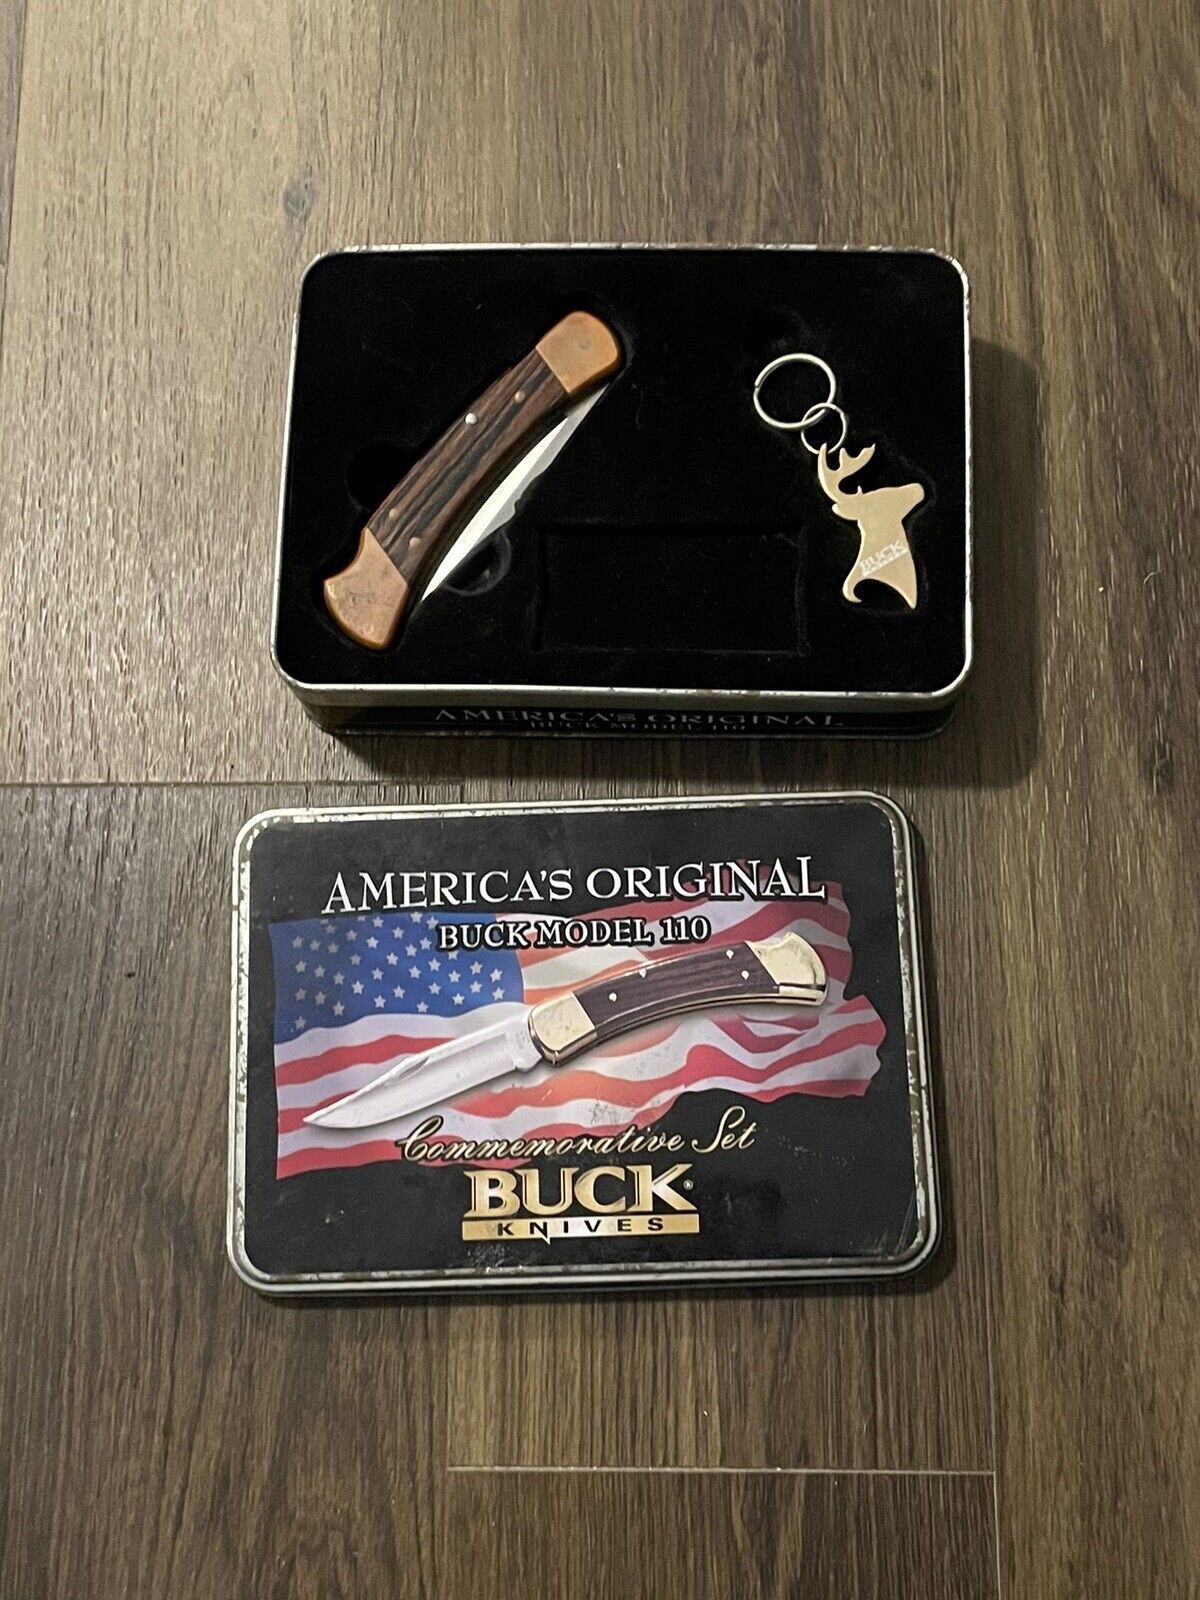 Unused 2005 Buck Knives 110 Commemorative Set Tin with keychain